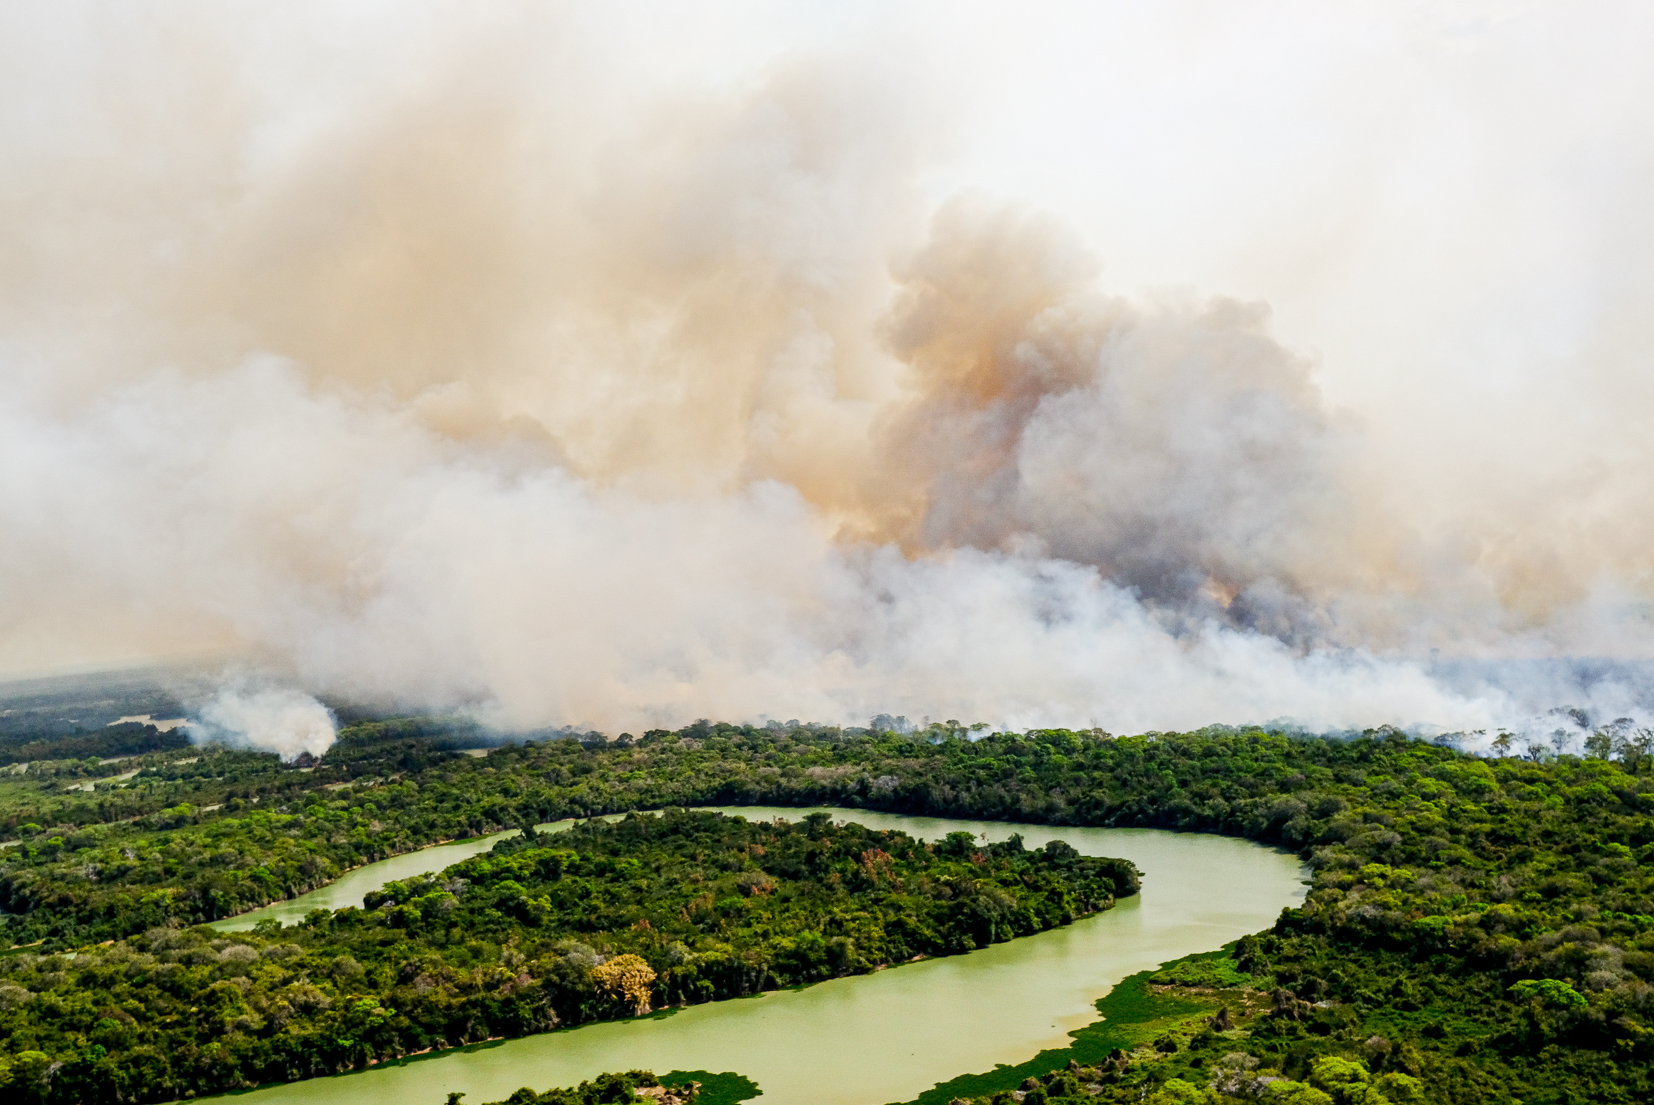 A section of rainforest is shown from above, with the river bending back on itself, and a great plume of smoke enveloping the forest in the background.